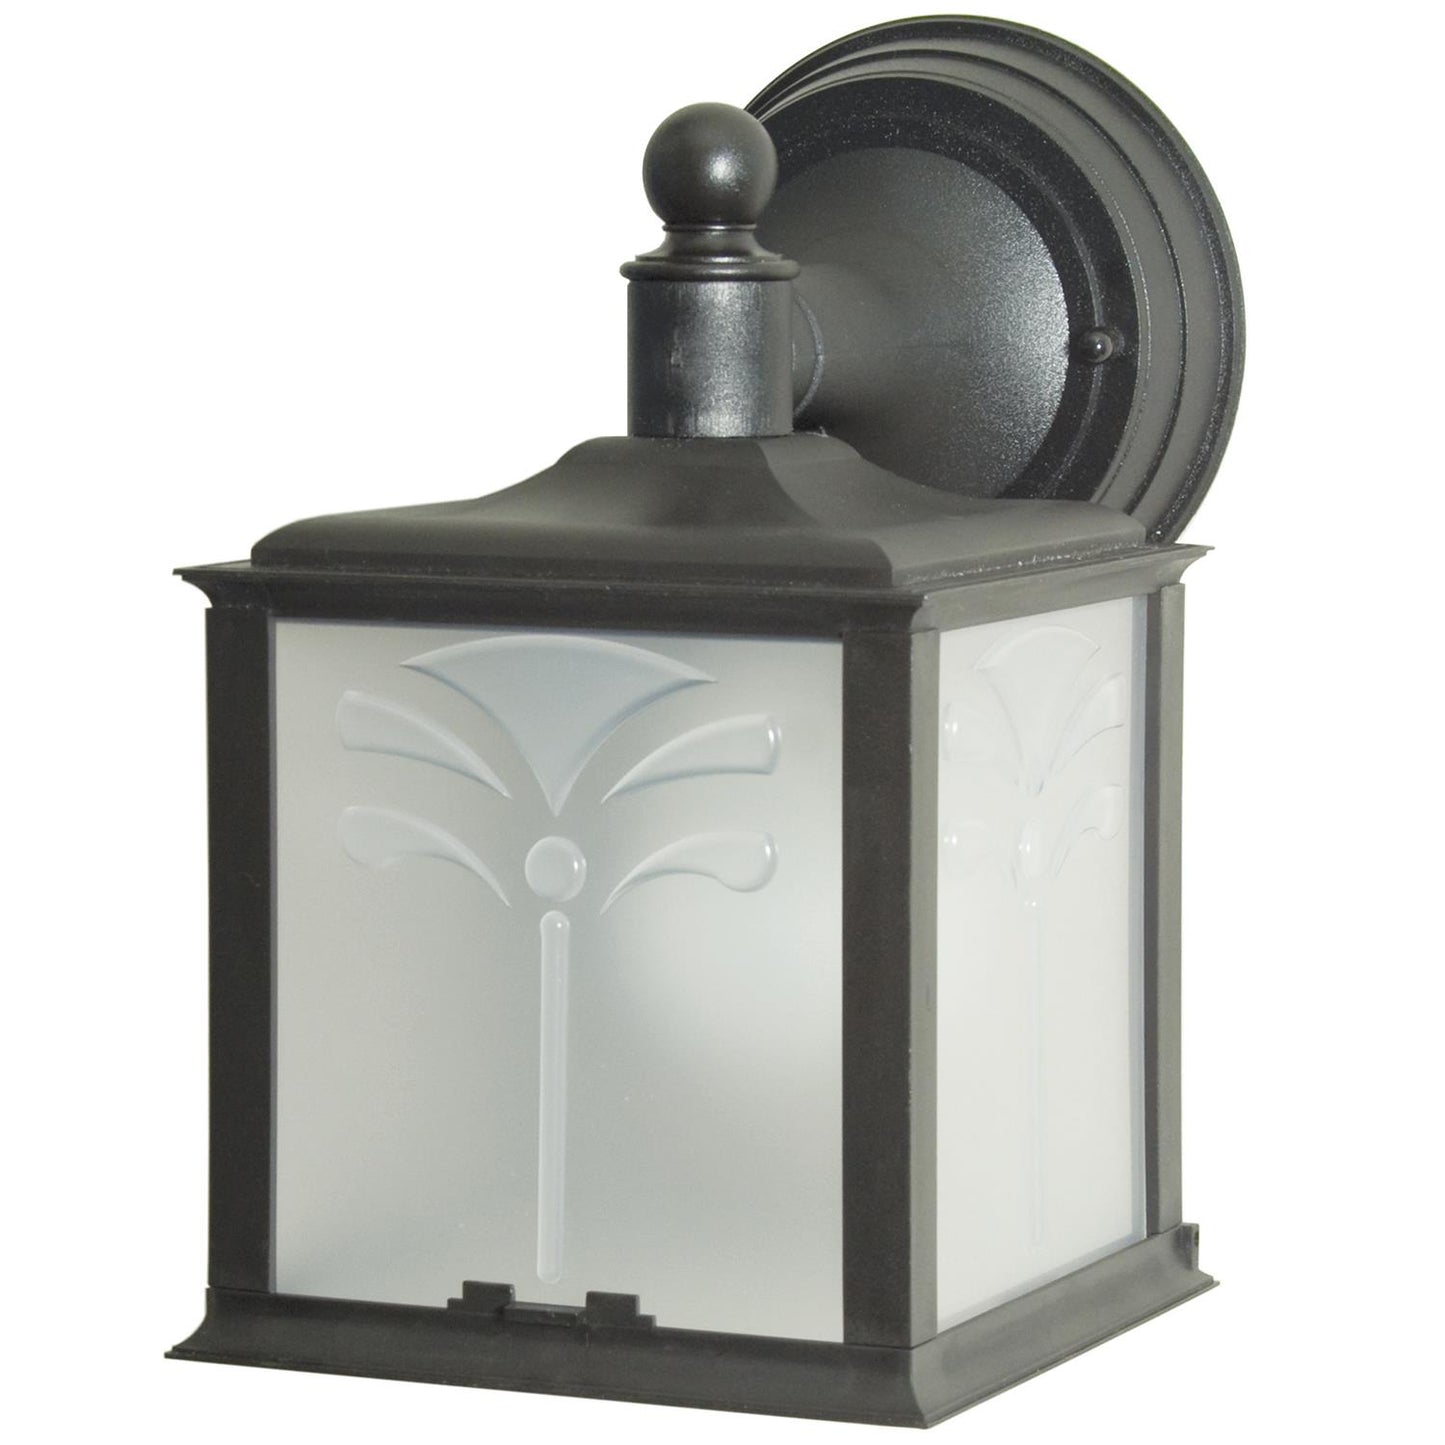 Sunlite Decorative Outdoor Energy Saving Orchid Down Fixture, Black Finish, Frosted Lens